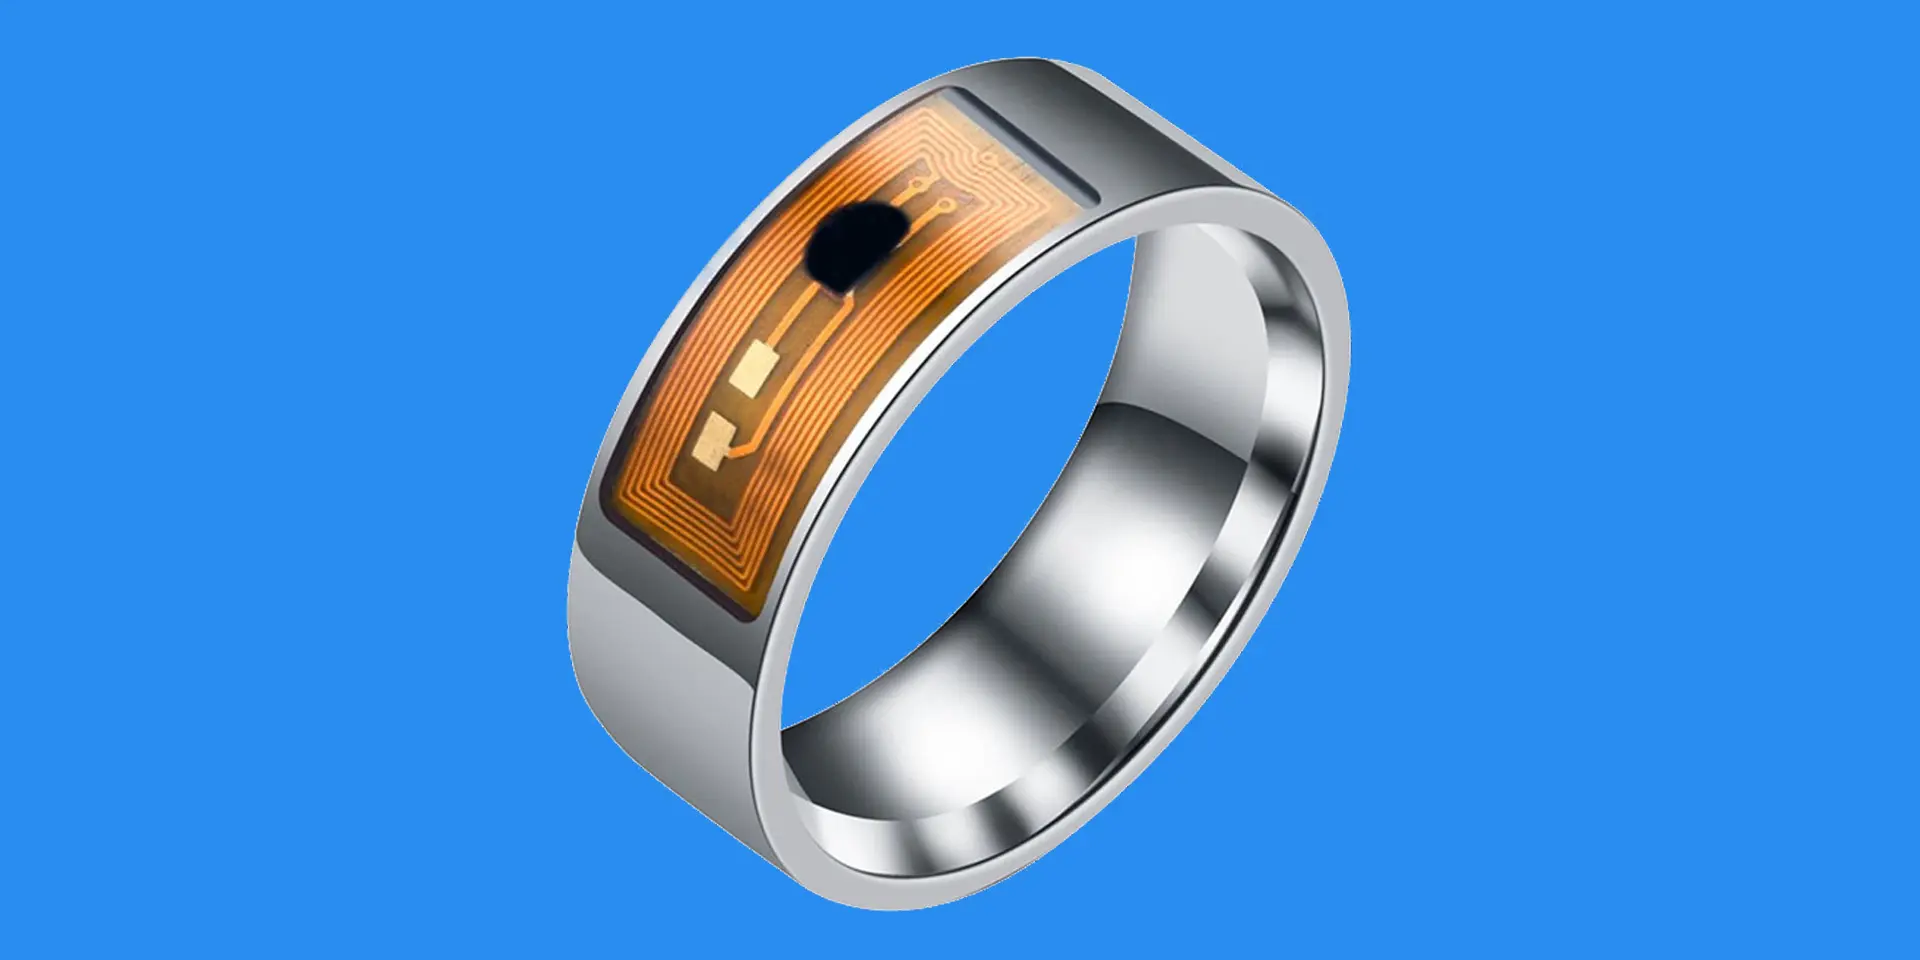 A picture of an NFC Ring.